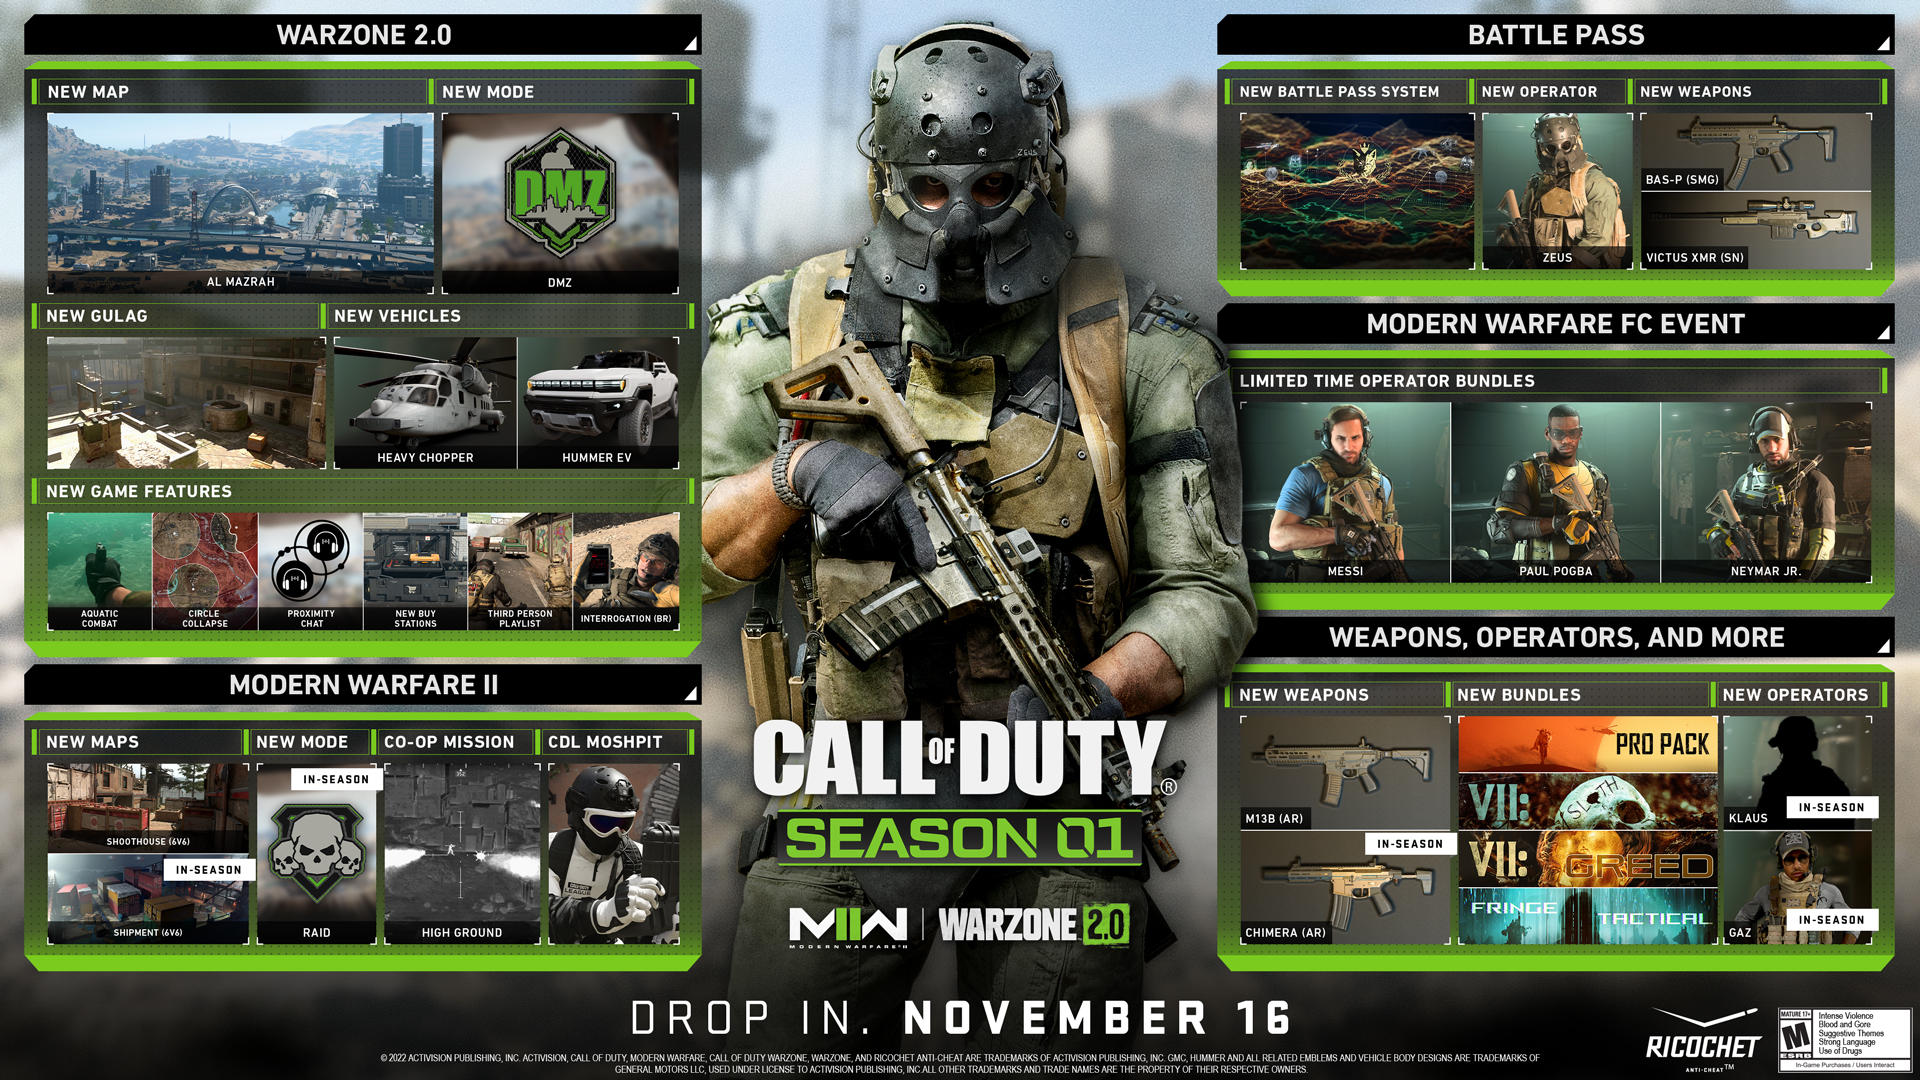 Introducing the Battle Pass and Bundles for Call of Duty®: Modern Warfare®  II and Call of Duty®: Warzone™ 2.0 Season 03